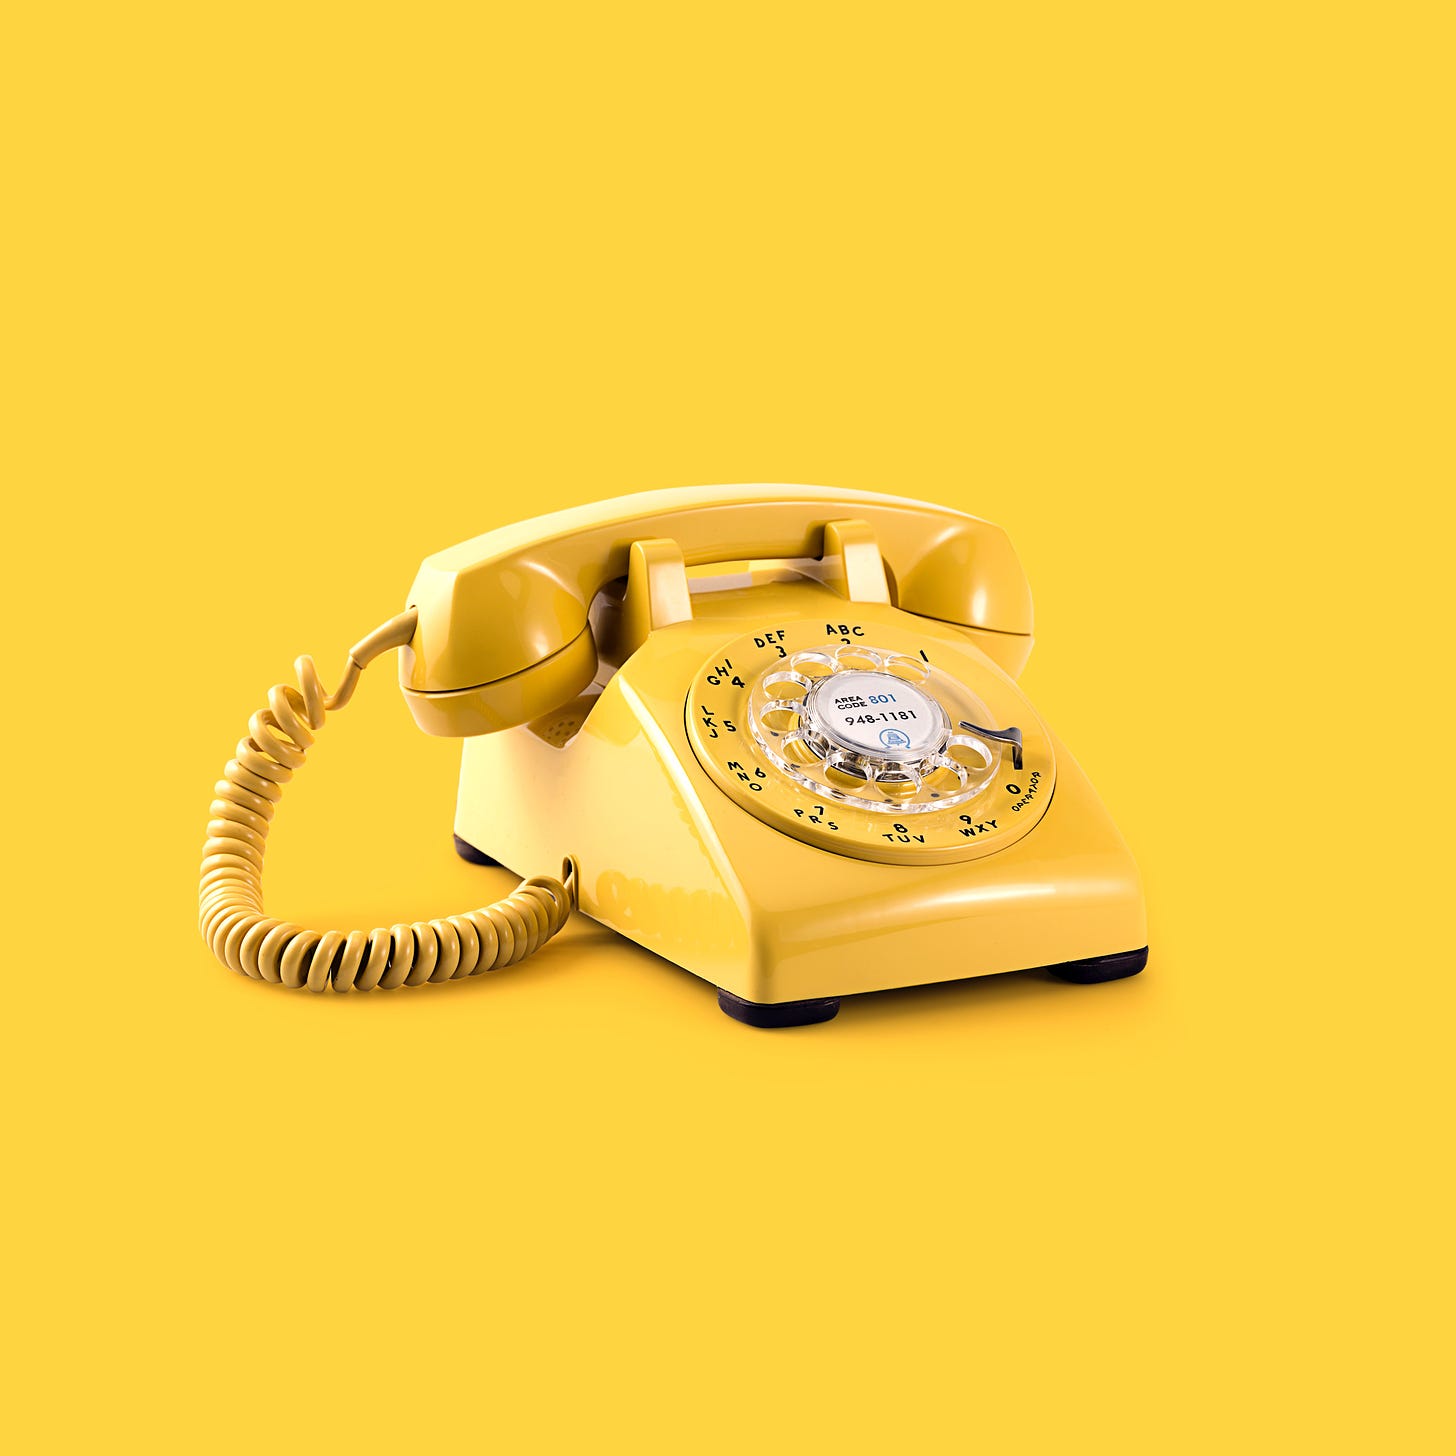 A yellow rotary phone with a yellow background.